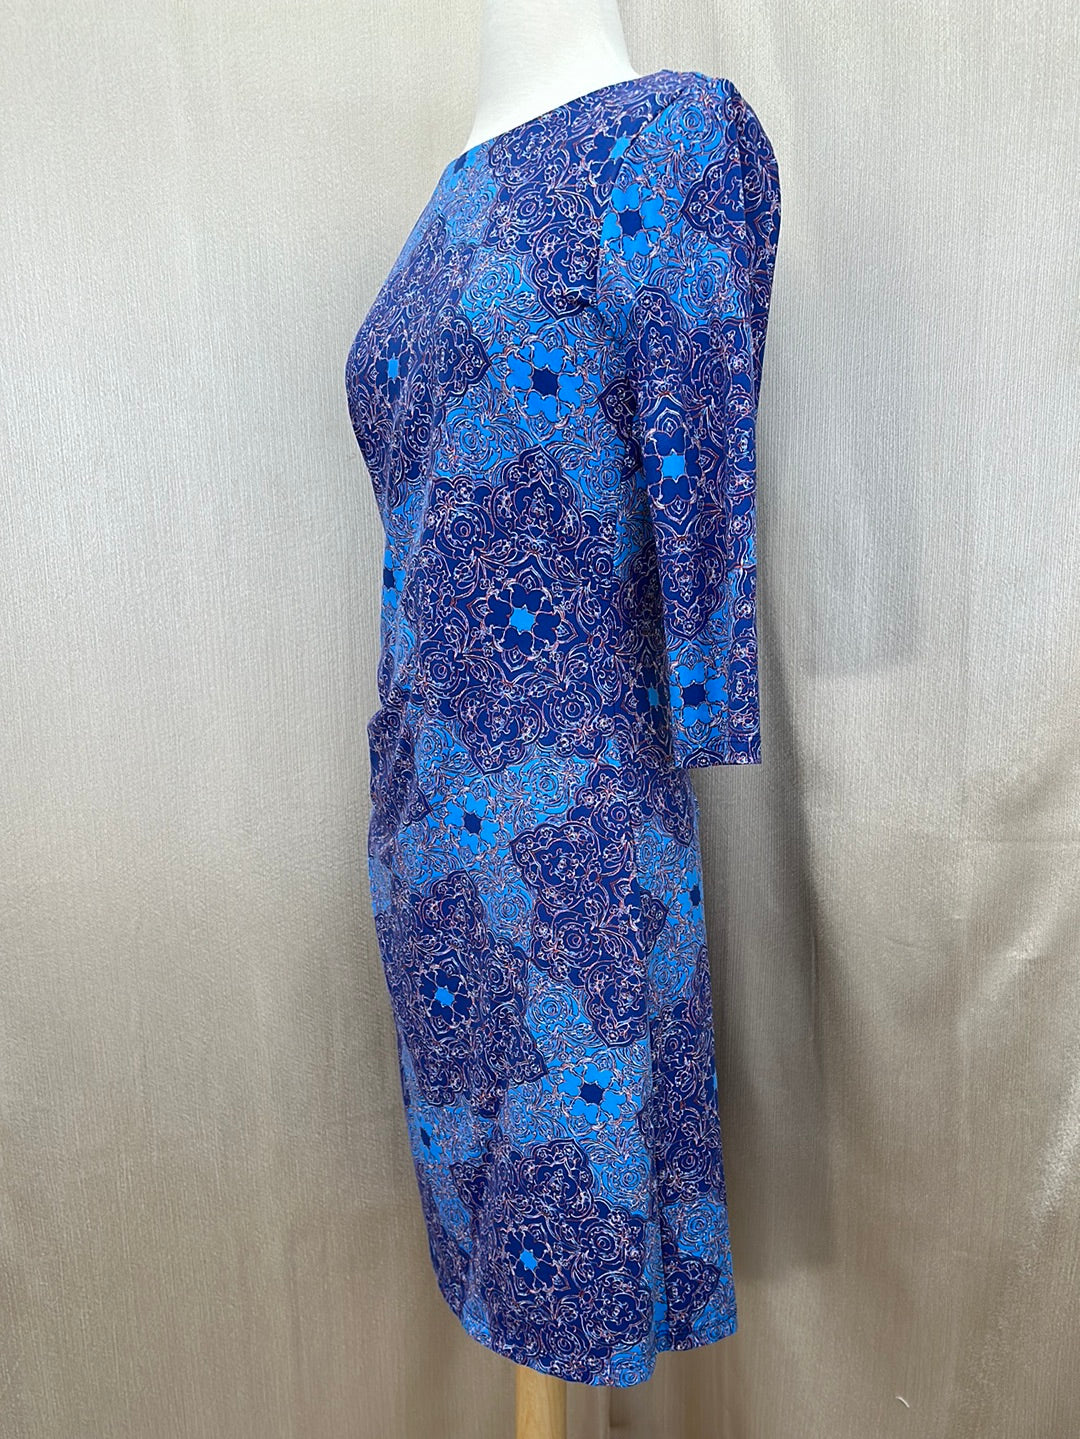 J. MCLAUGHLIN blue print Catalina Cloth 3/4 Sleeve Side Ruched Dress - S